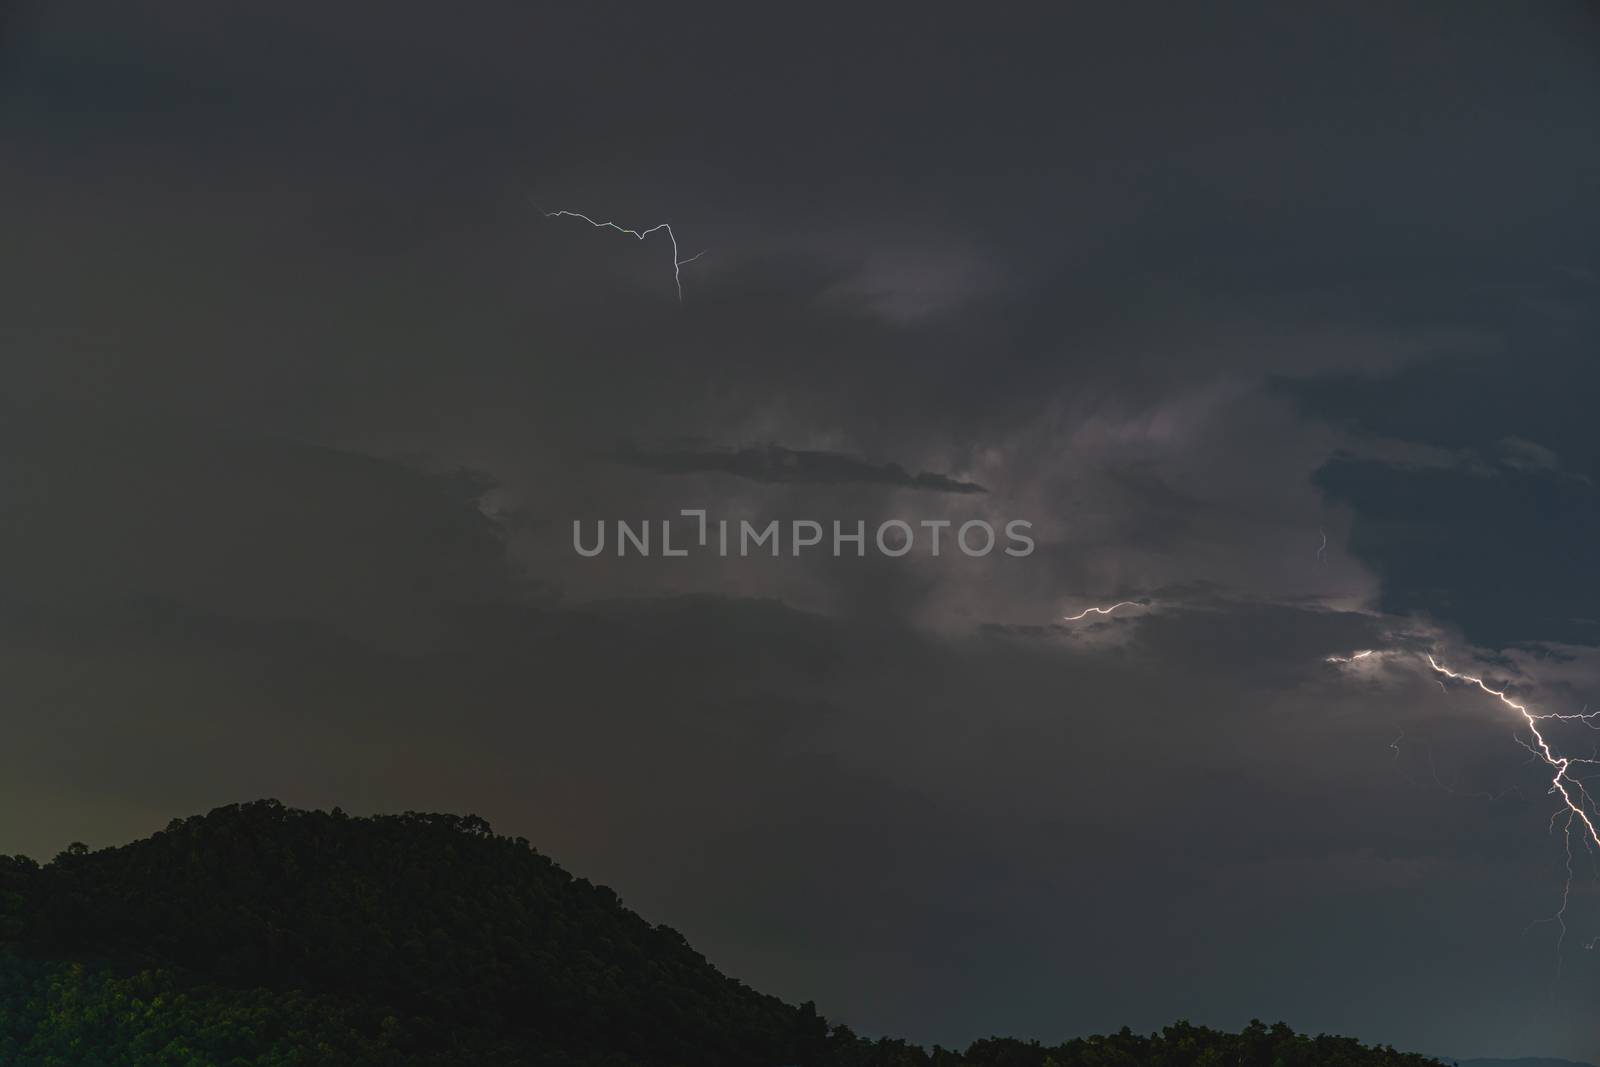 Storm lightning strikes in mountains during a thunderstorm at night. Beautiful dramatic view by peerapixs